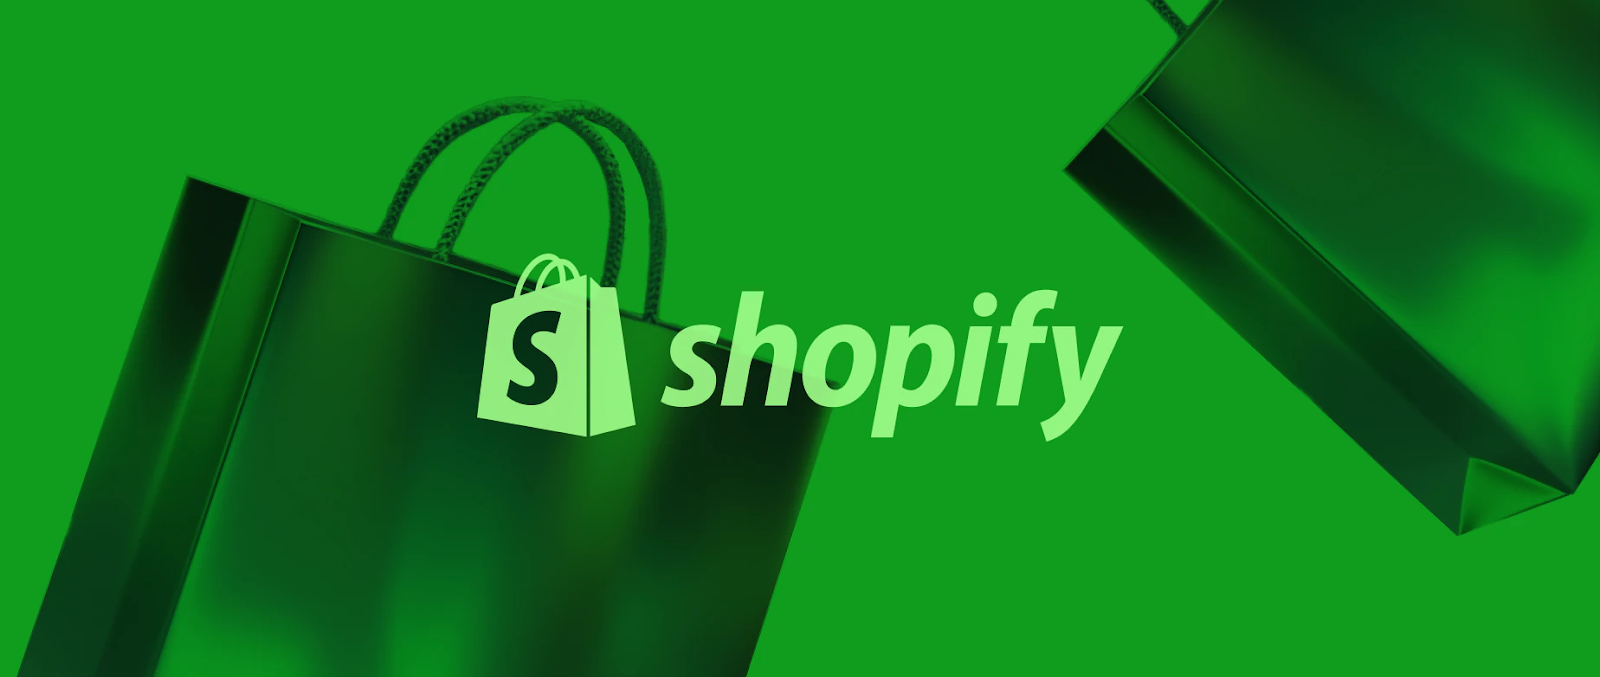 Shopify Is the leading platform with 25% share